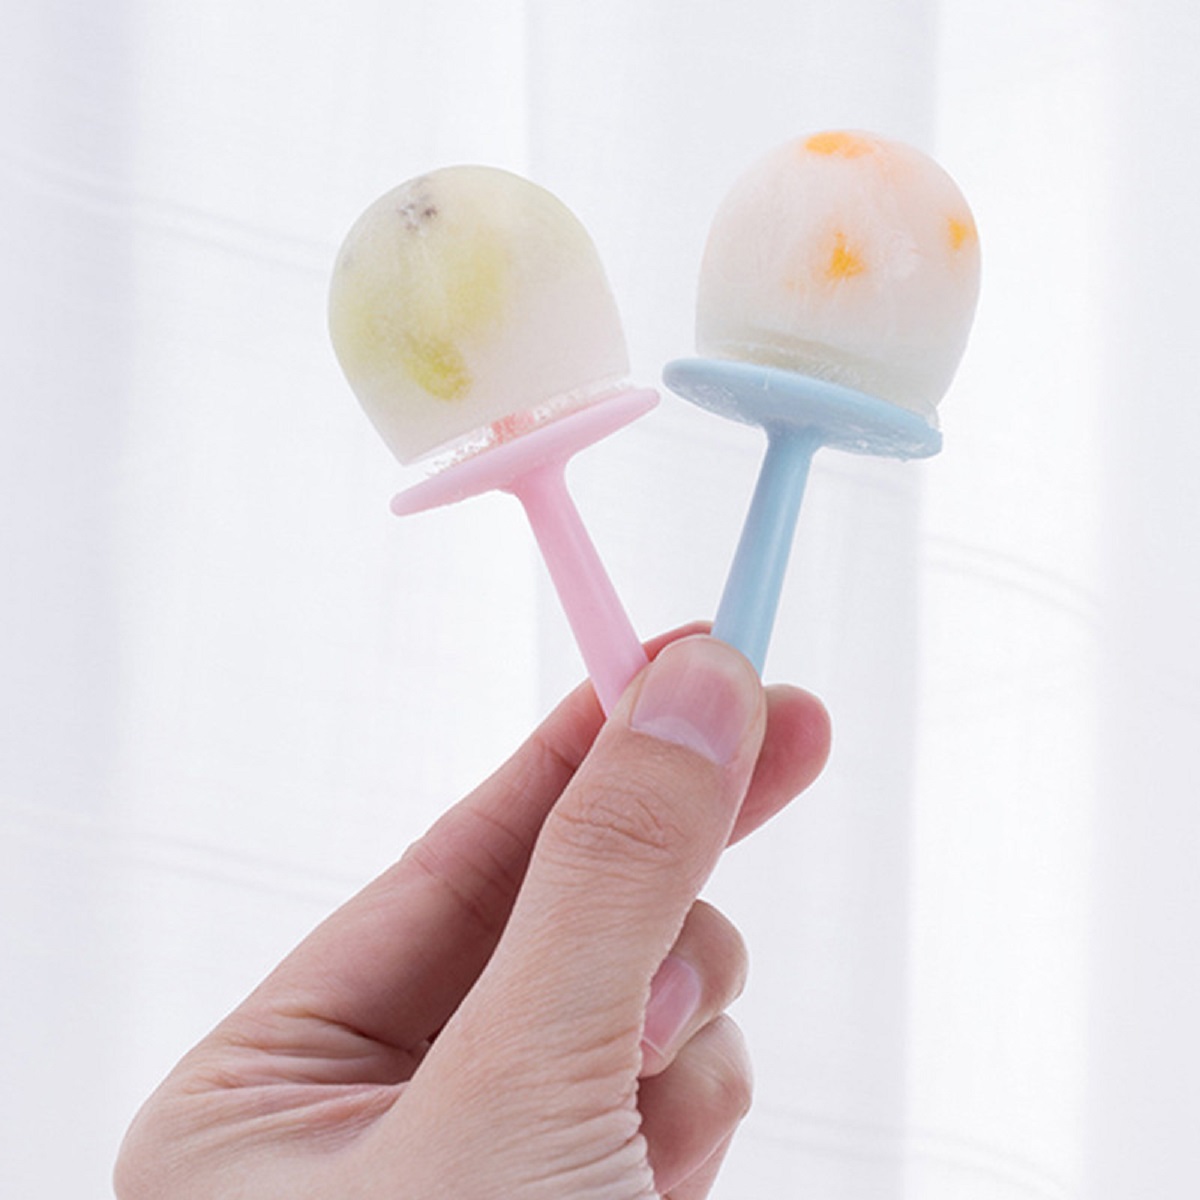 Portable-Food-Grade-Ice-Cream-Mold-Popsicle-Mould-Ball-Maker-Baby-DIY-Food-Supplement-Tools-for-Frui-1811799-4